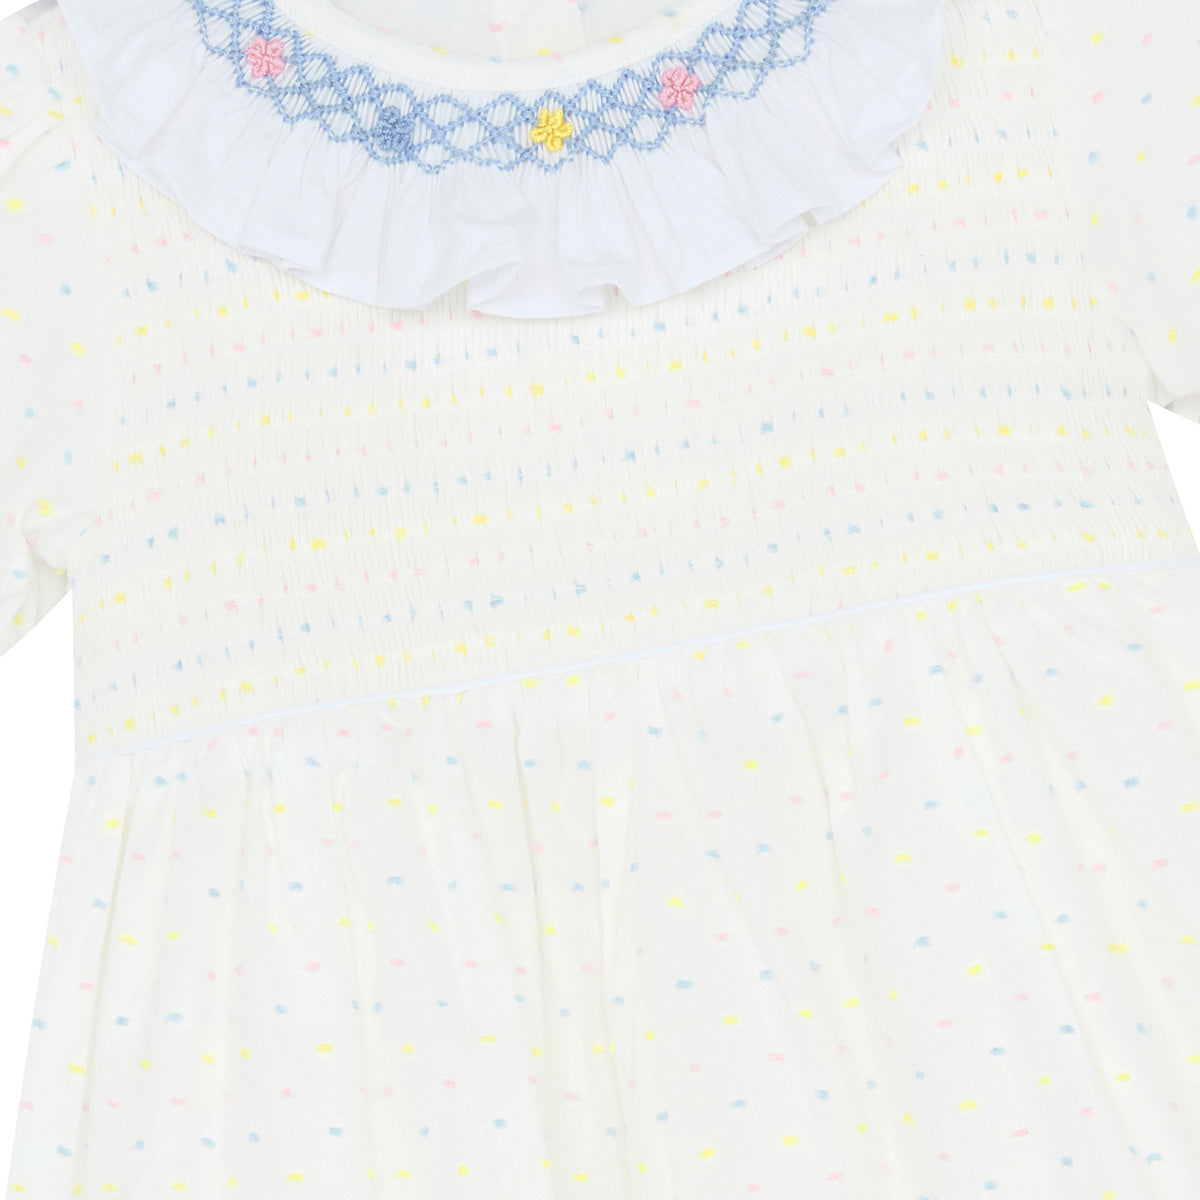 Little Princess Anne Hand Smocked Embroidered Dot Cotton Baby Dress White Pink | Holly Hastie London